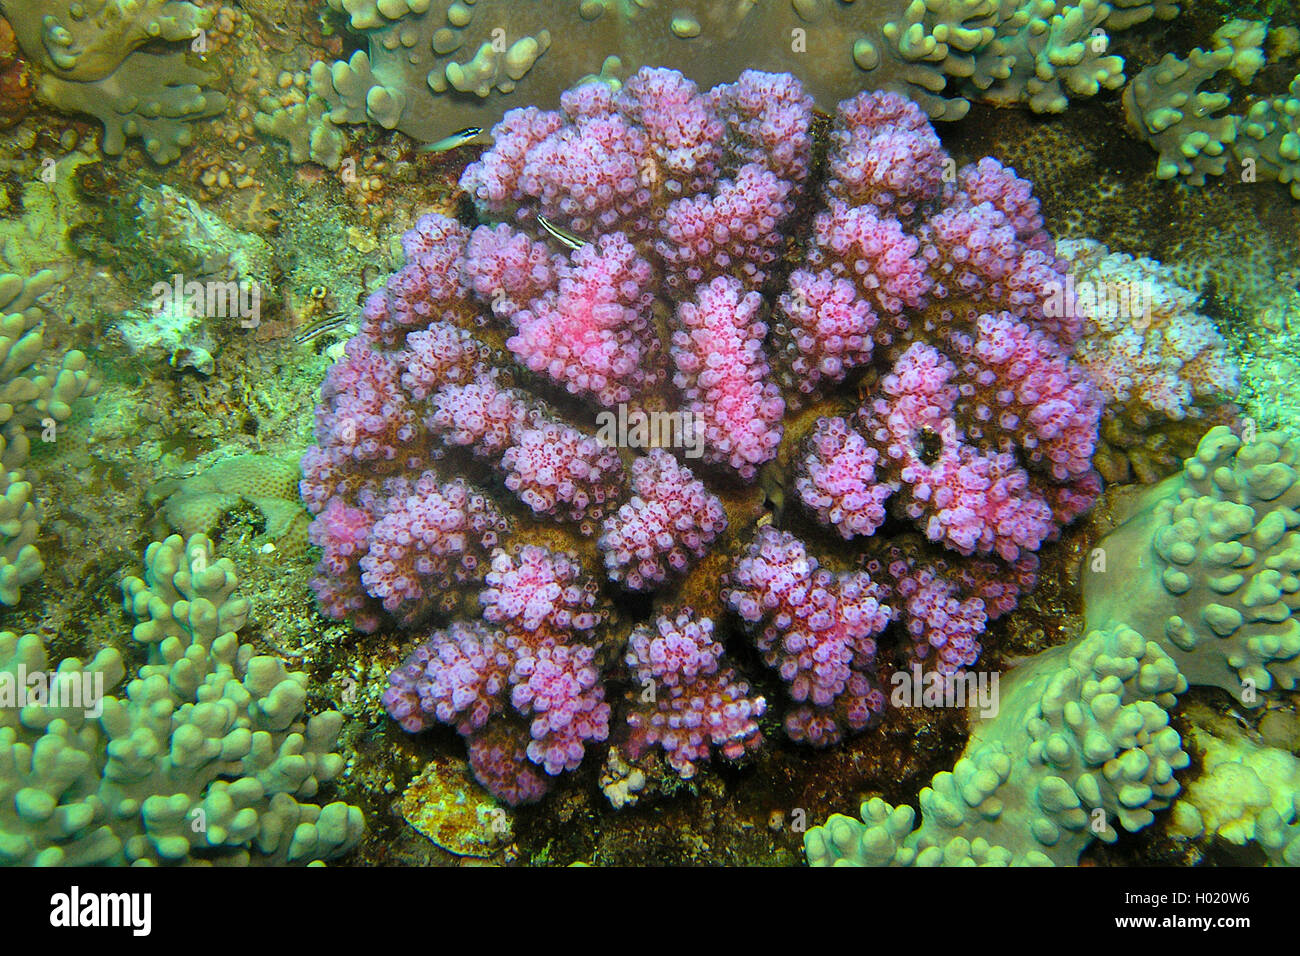 cauliflower coral, rasp coral, knob-horned coral (Pocillopora verrucosa), at coral reef, Egypt, Red Sea Stock Photo